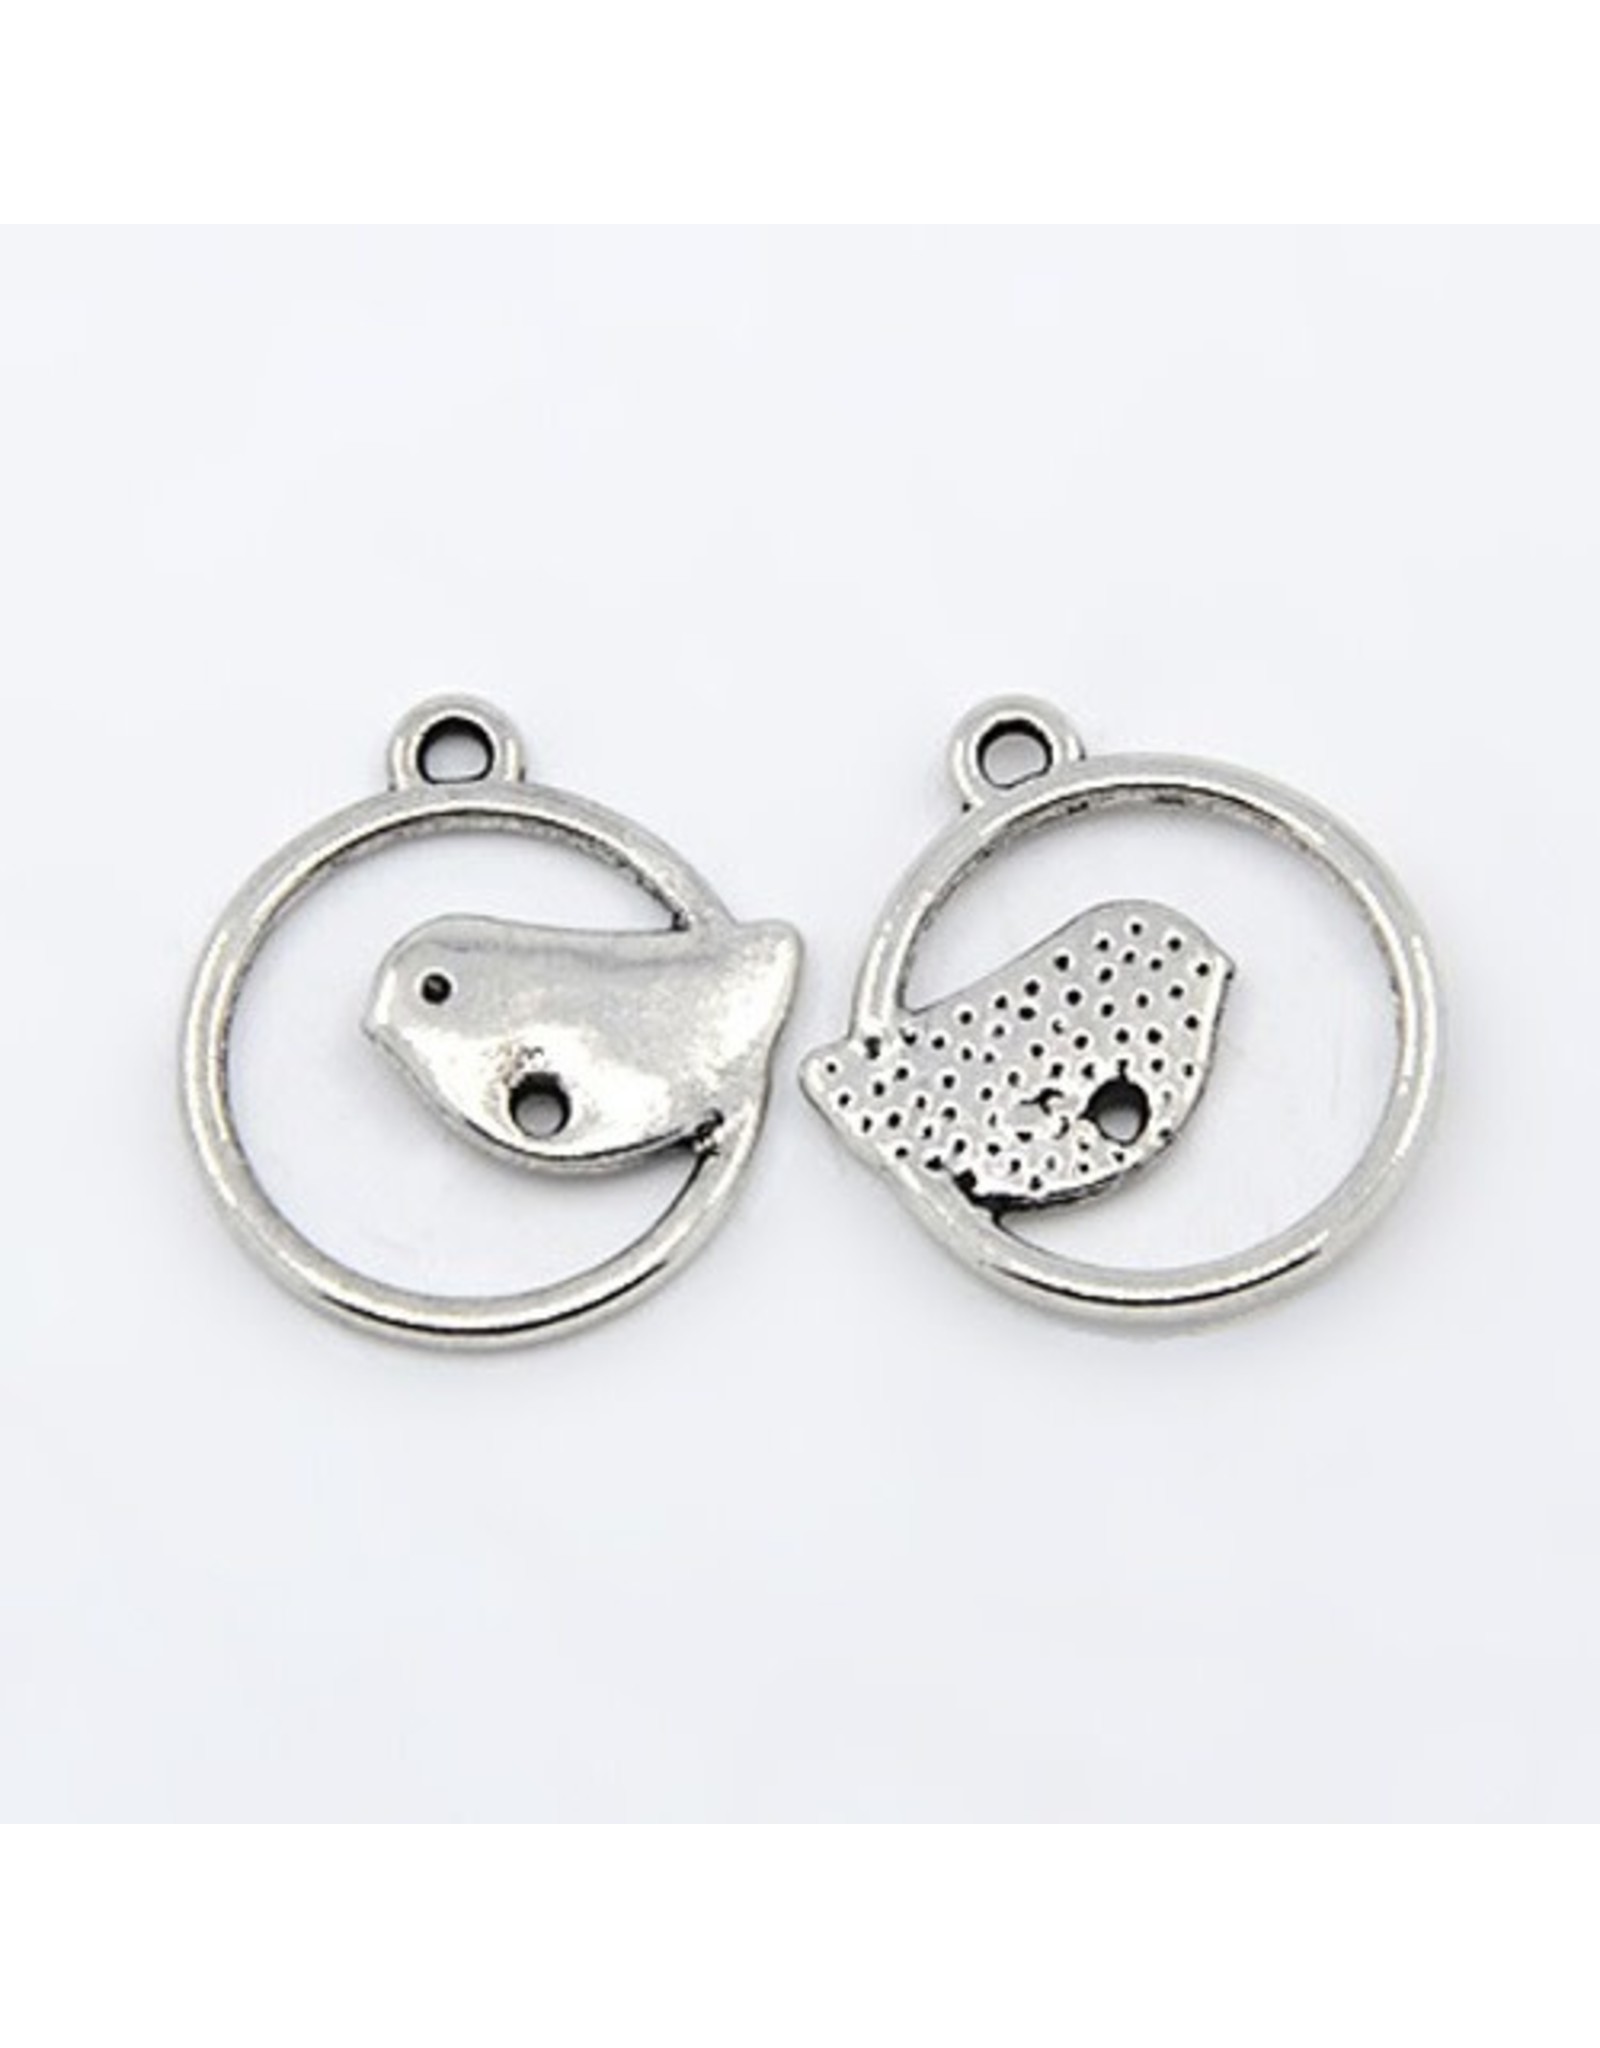 Bird In Circle  20x15mm  Antique Silver  x5  NF